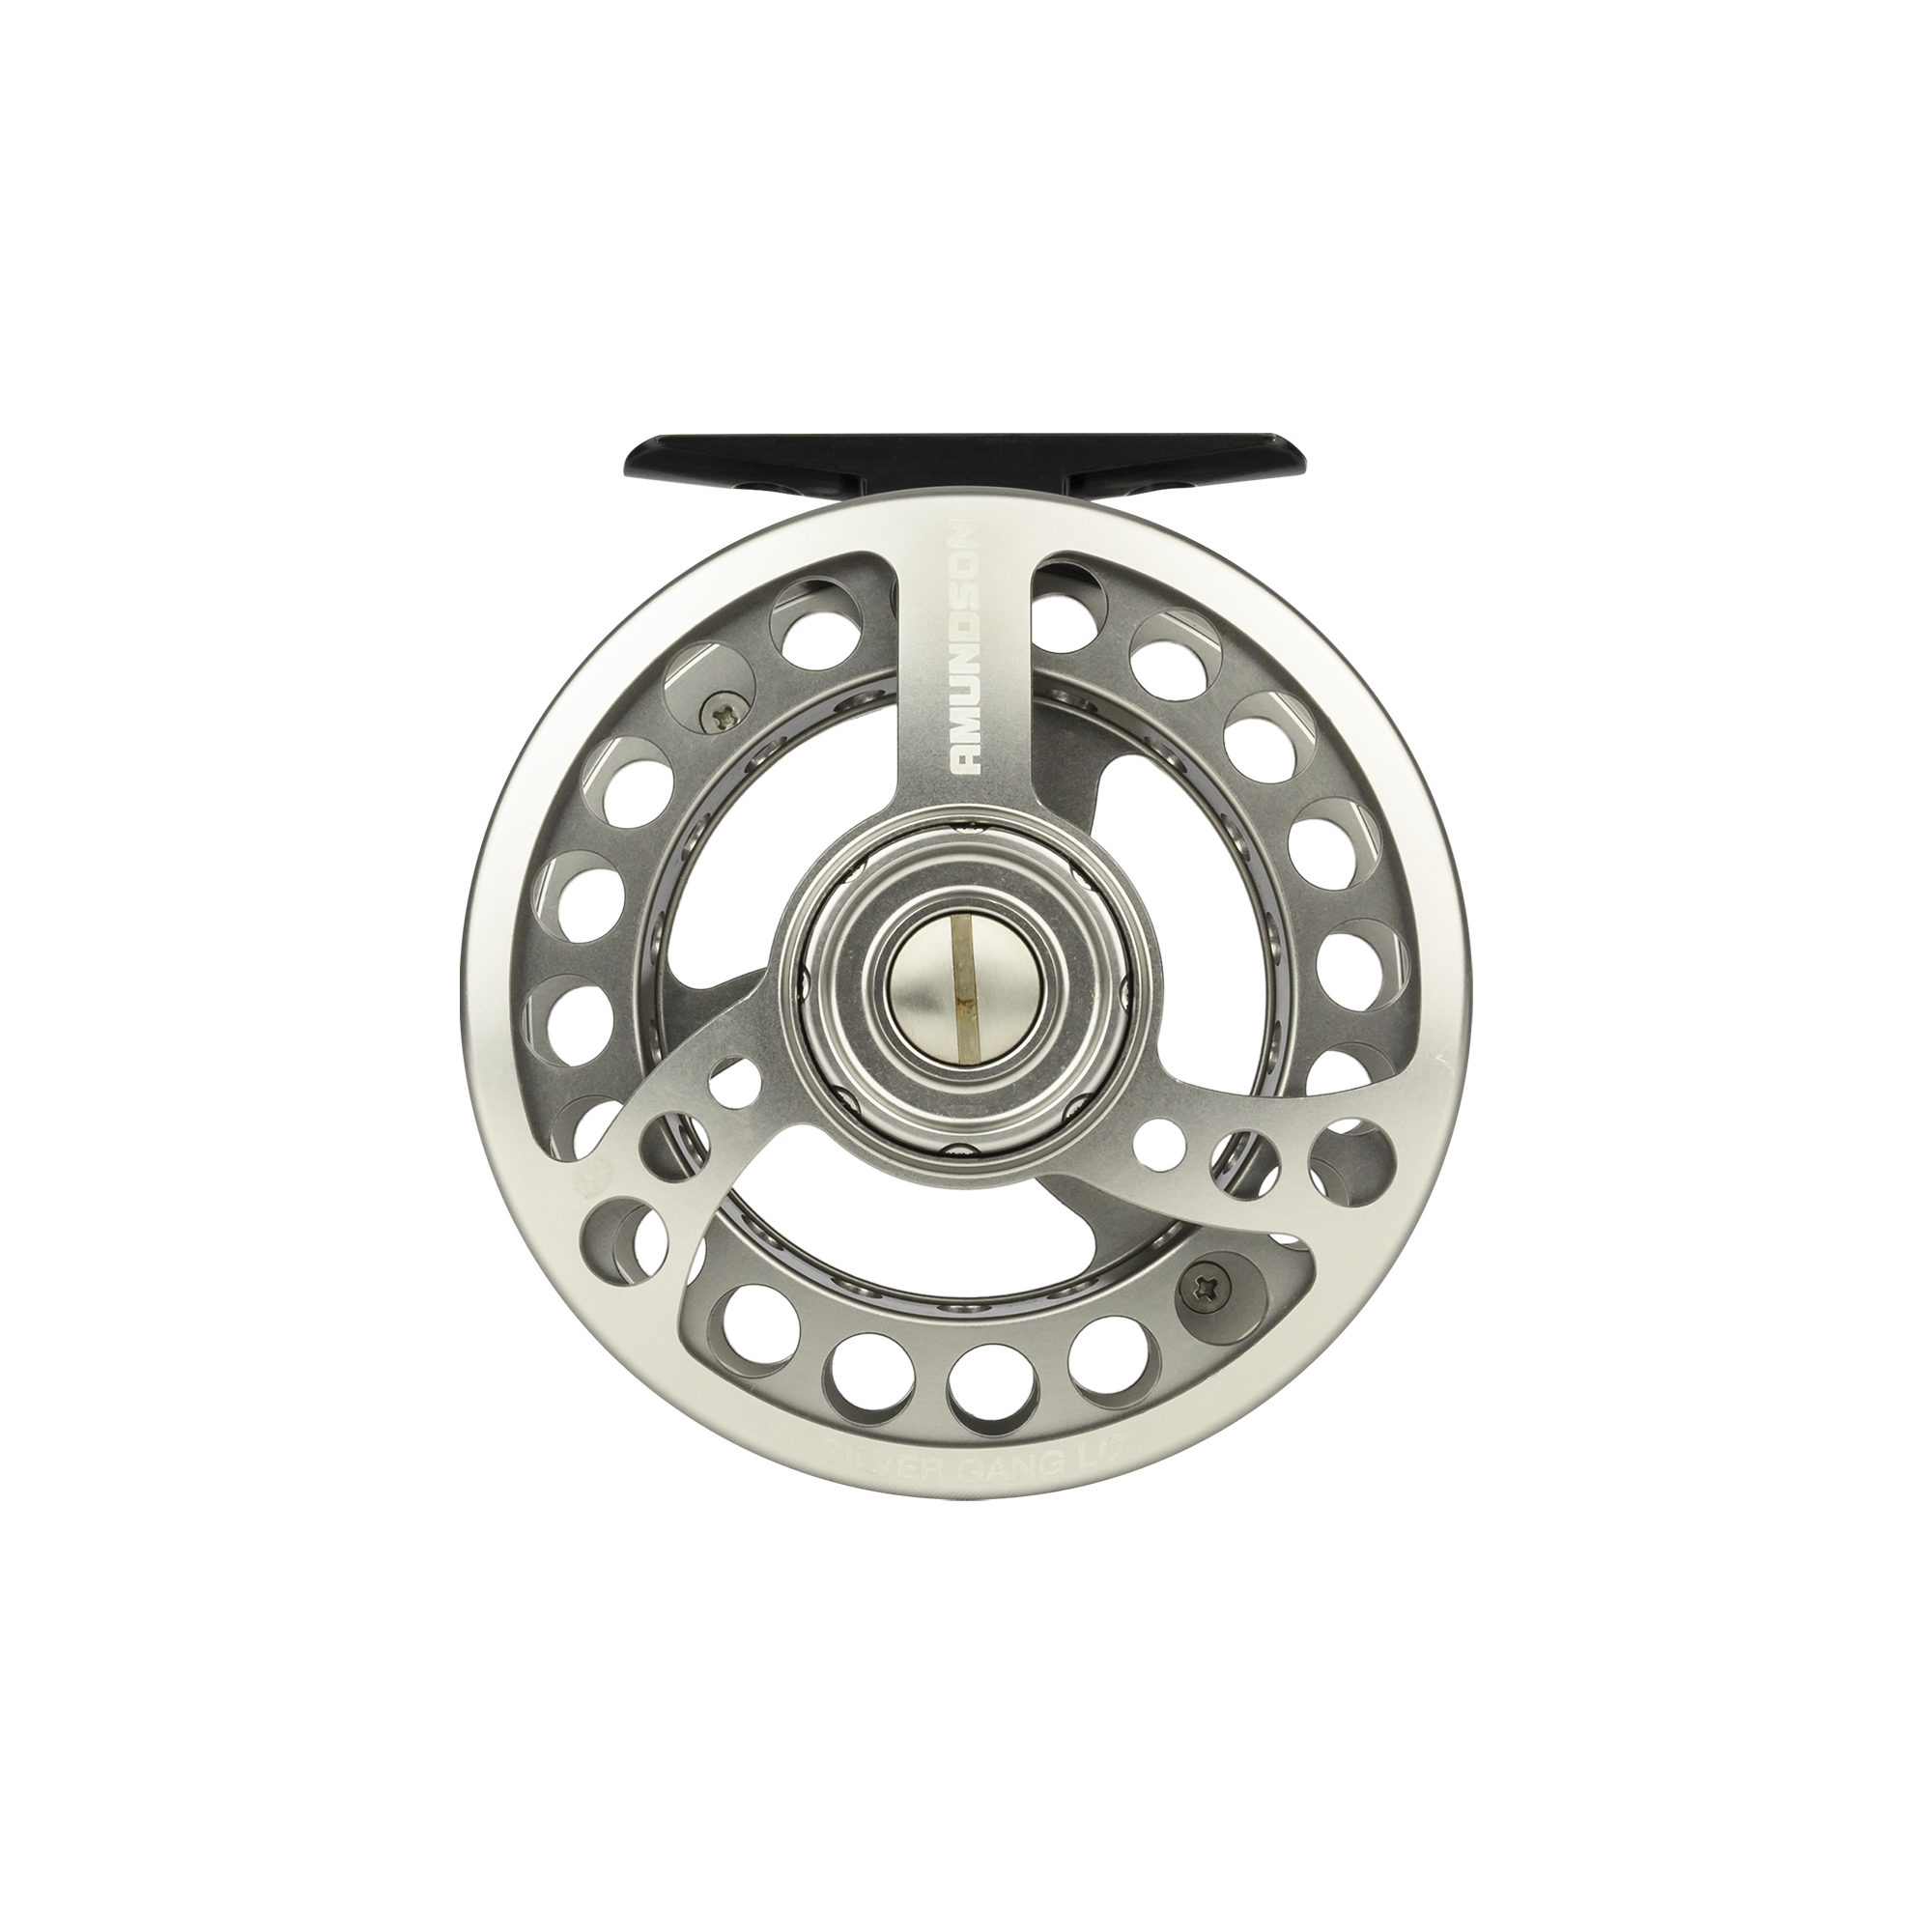 Martin Fly Reel Pawl Replacement by Andrew G, Download free STL model